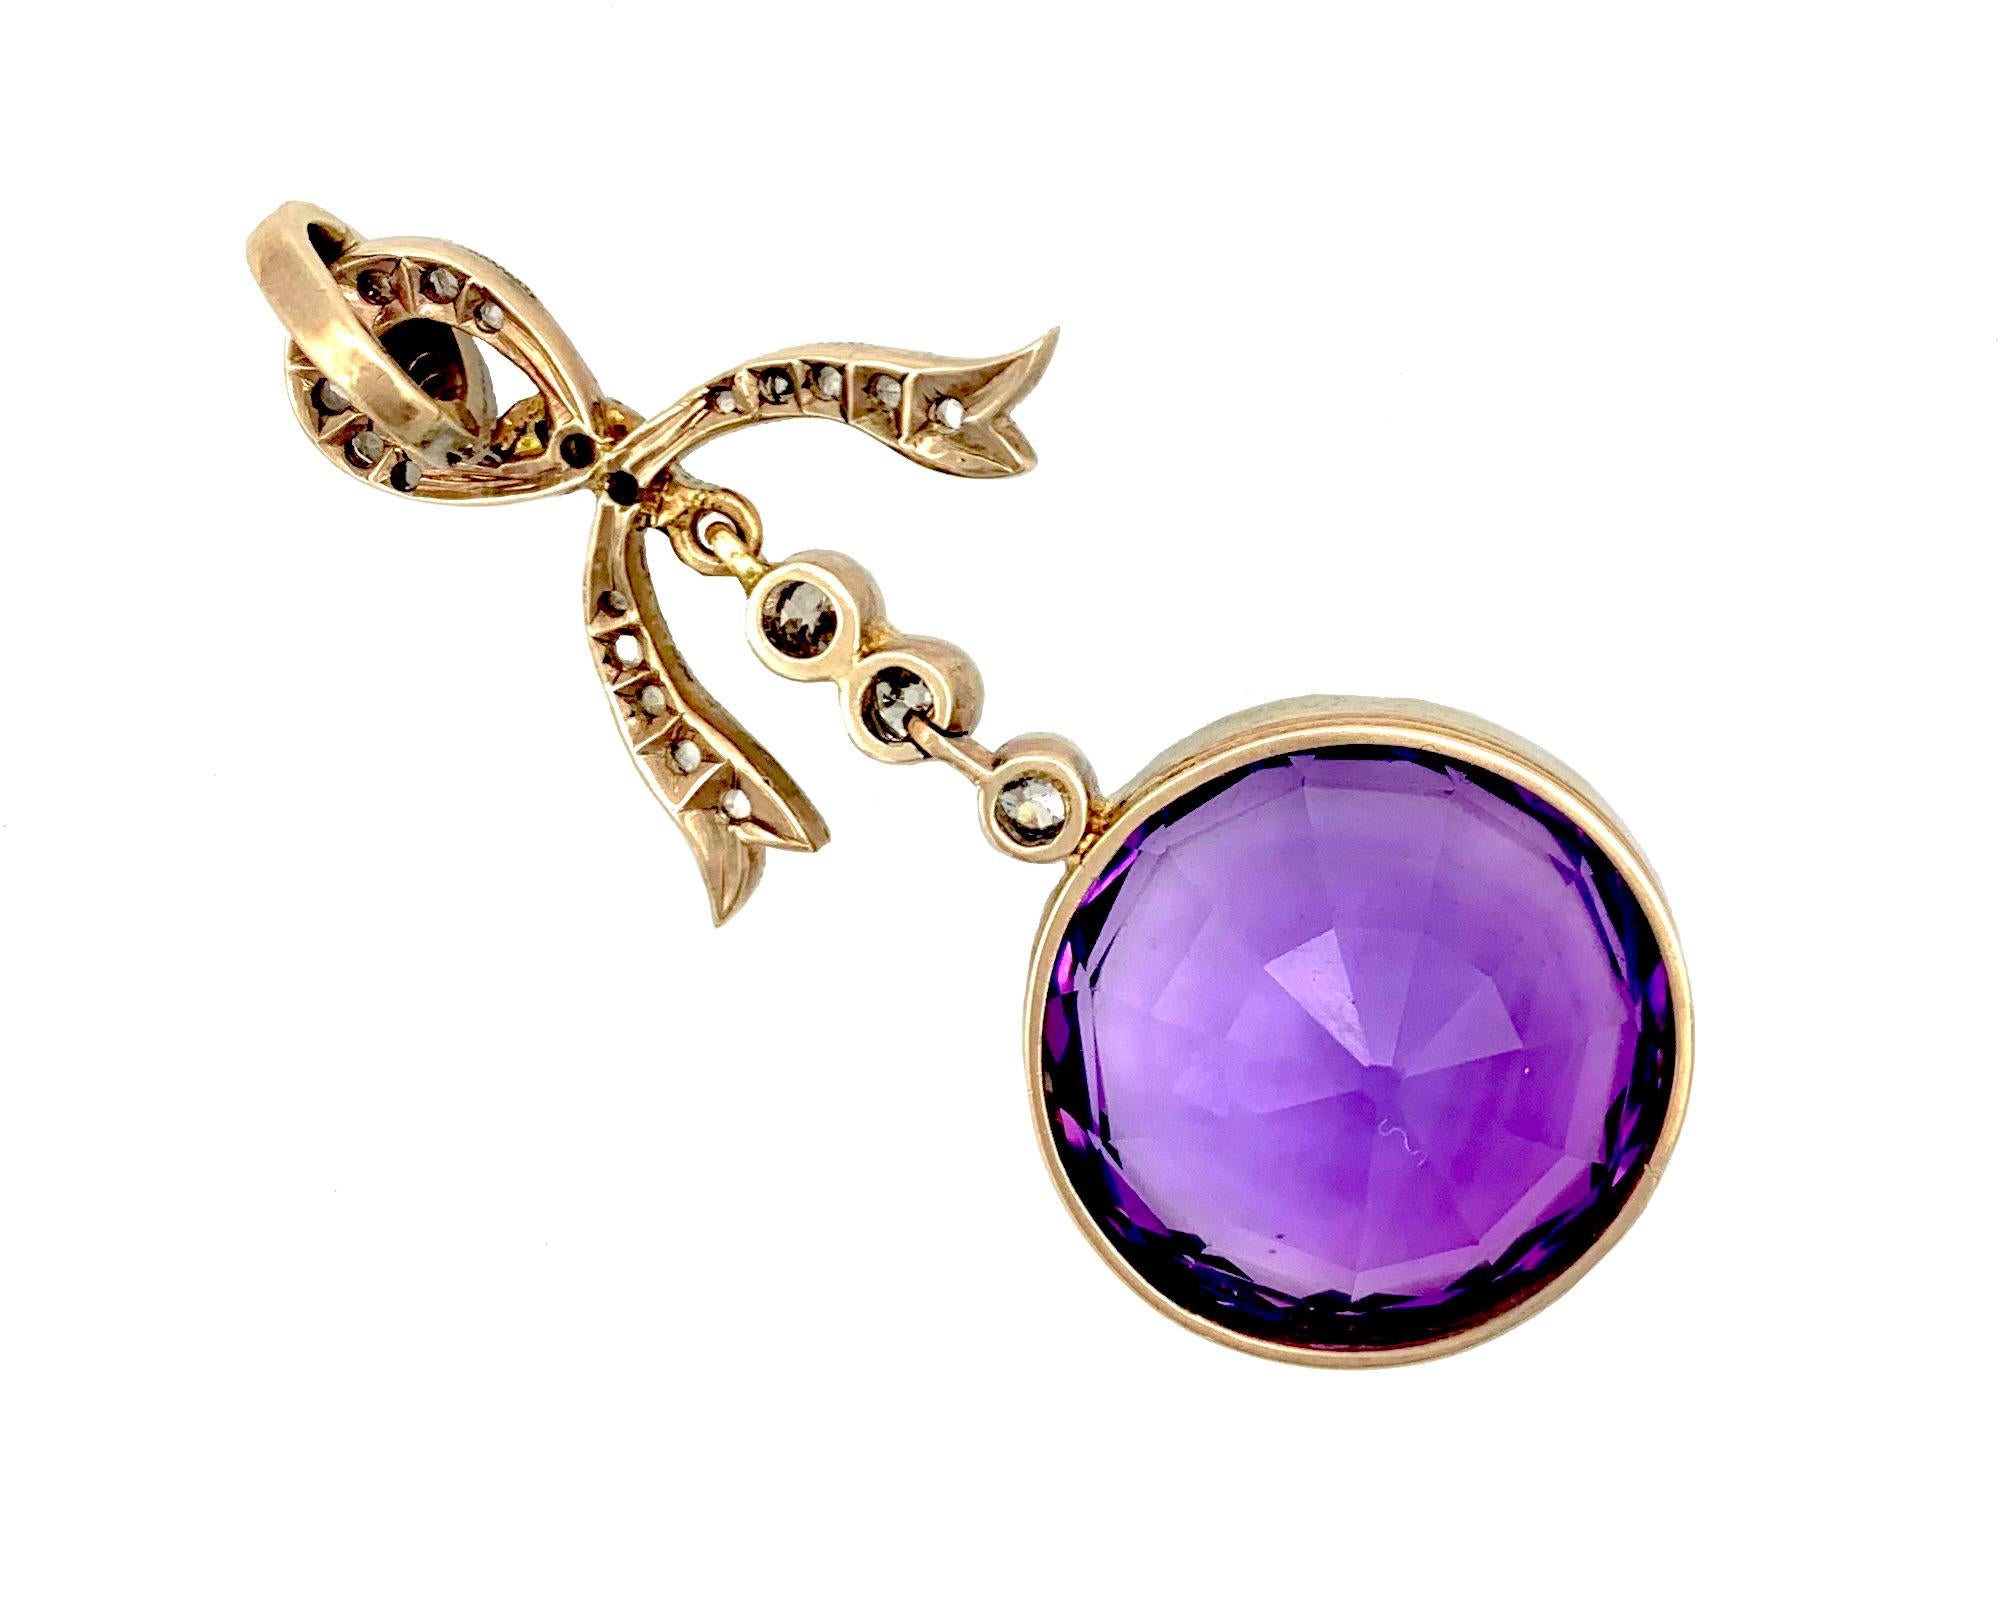 This striking piece of Belle Époque jewellery was created around the last decade of the 19th century. The pendant is set with a fine size round amethyst with a diameter of 1.9 cm mounted in a mille griffe platinum mount backed on 14 karat yellow